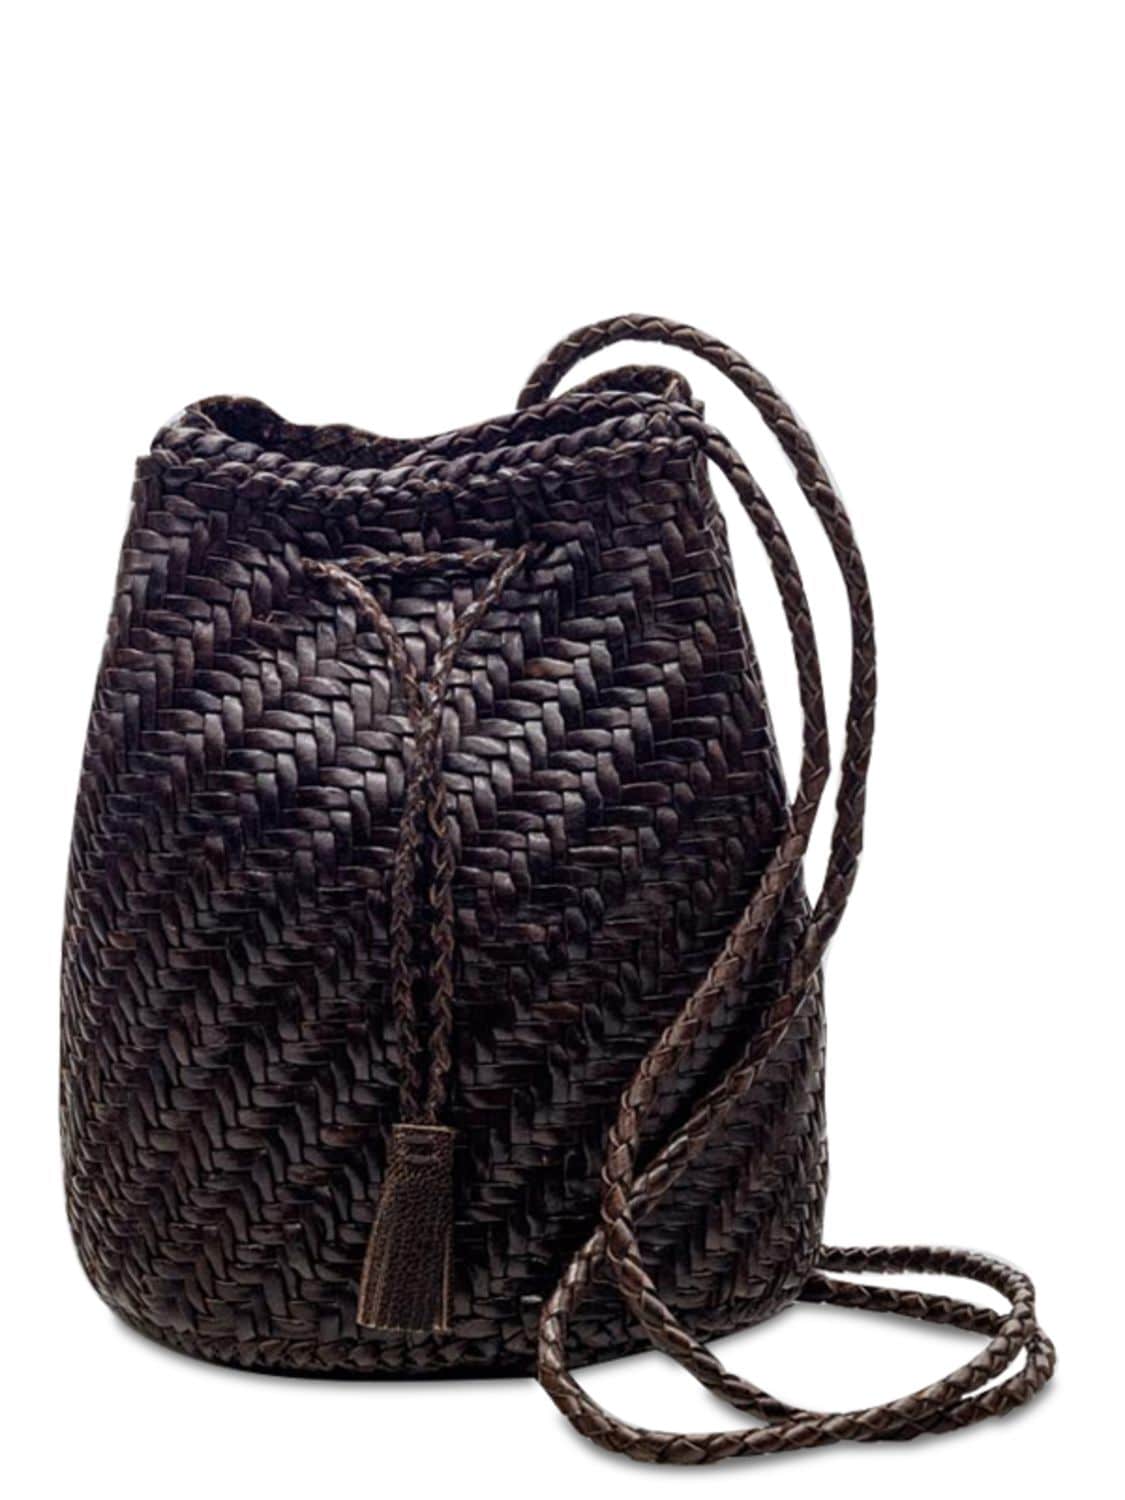 Dragon Diffusion Pompom Doublej Woven Leather Basket Bag In Dark Brown